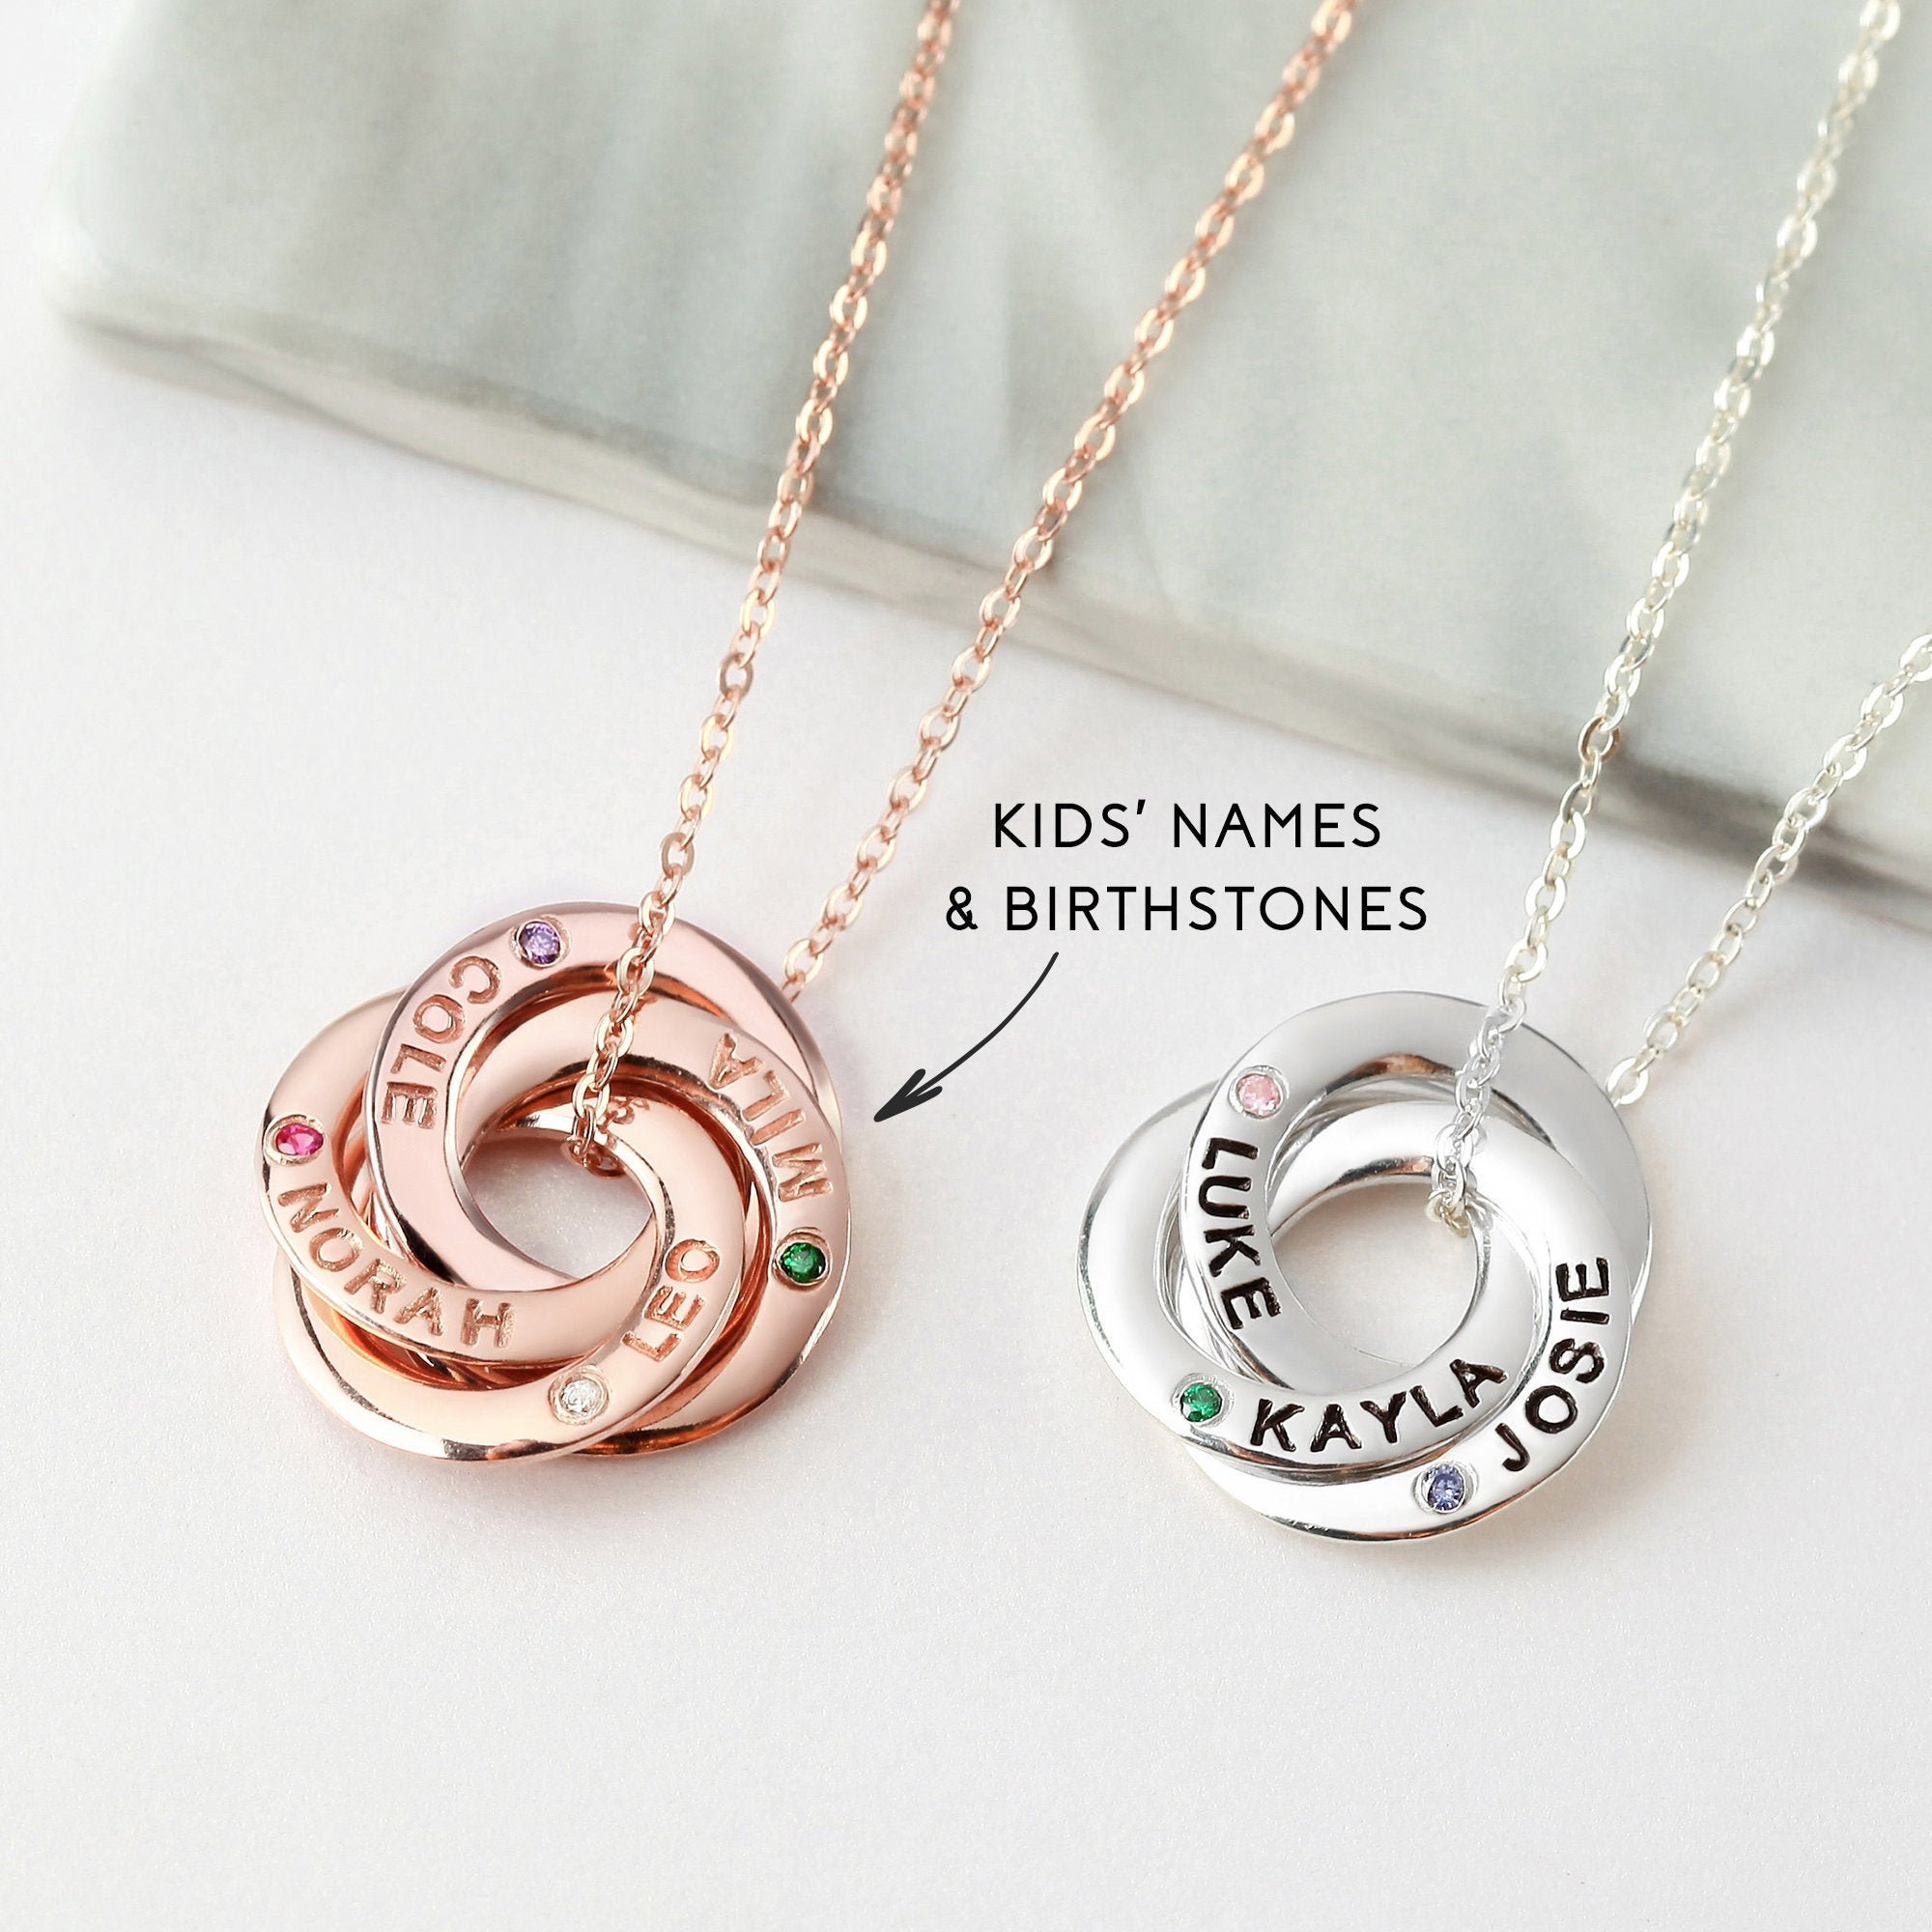 Nana Heart 1-6 Birthstone Mother & Child Necklace with Chain for Women -  Rose Gold Plated, Stone 5 - Walmart.com